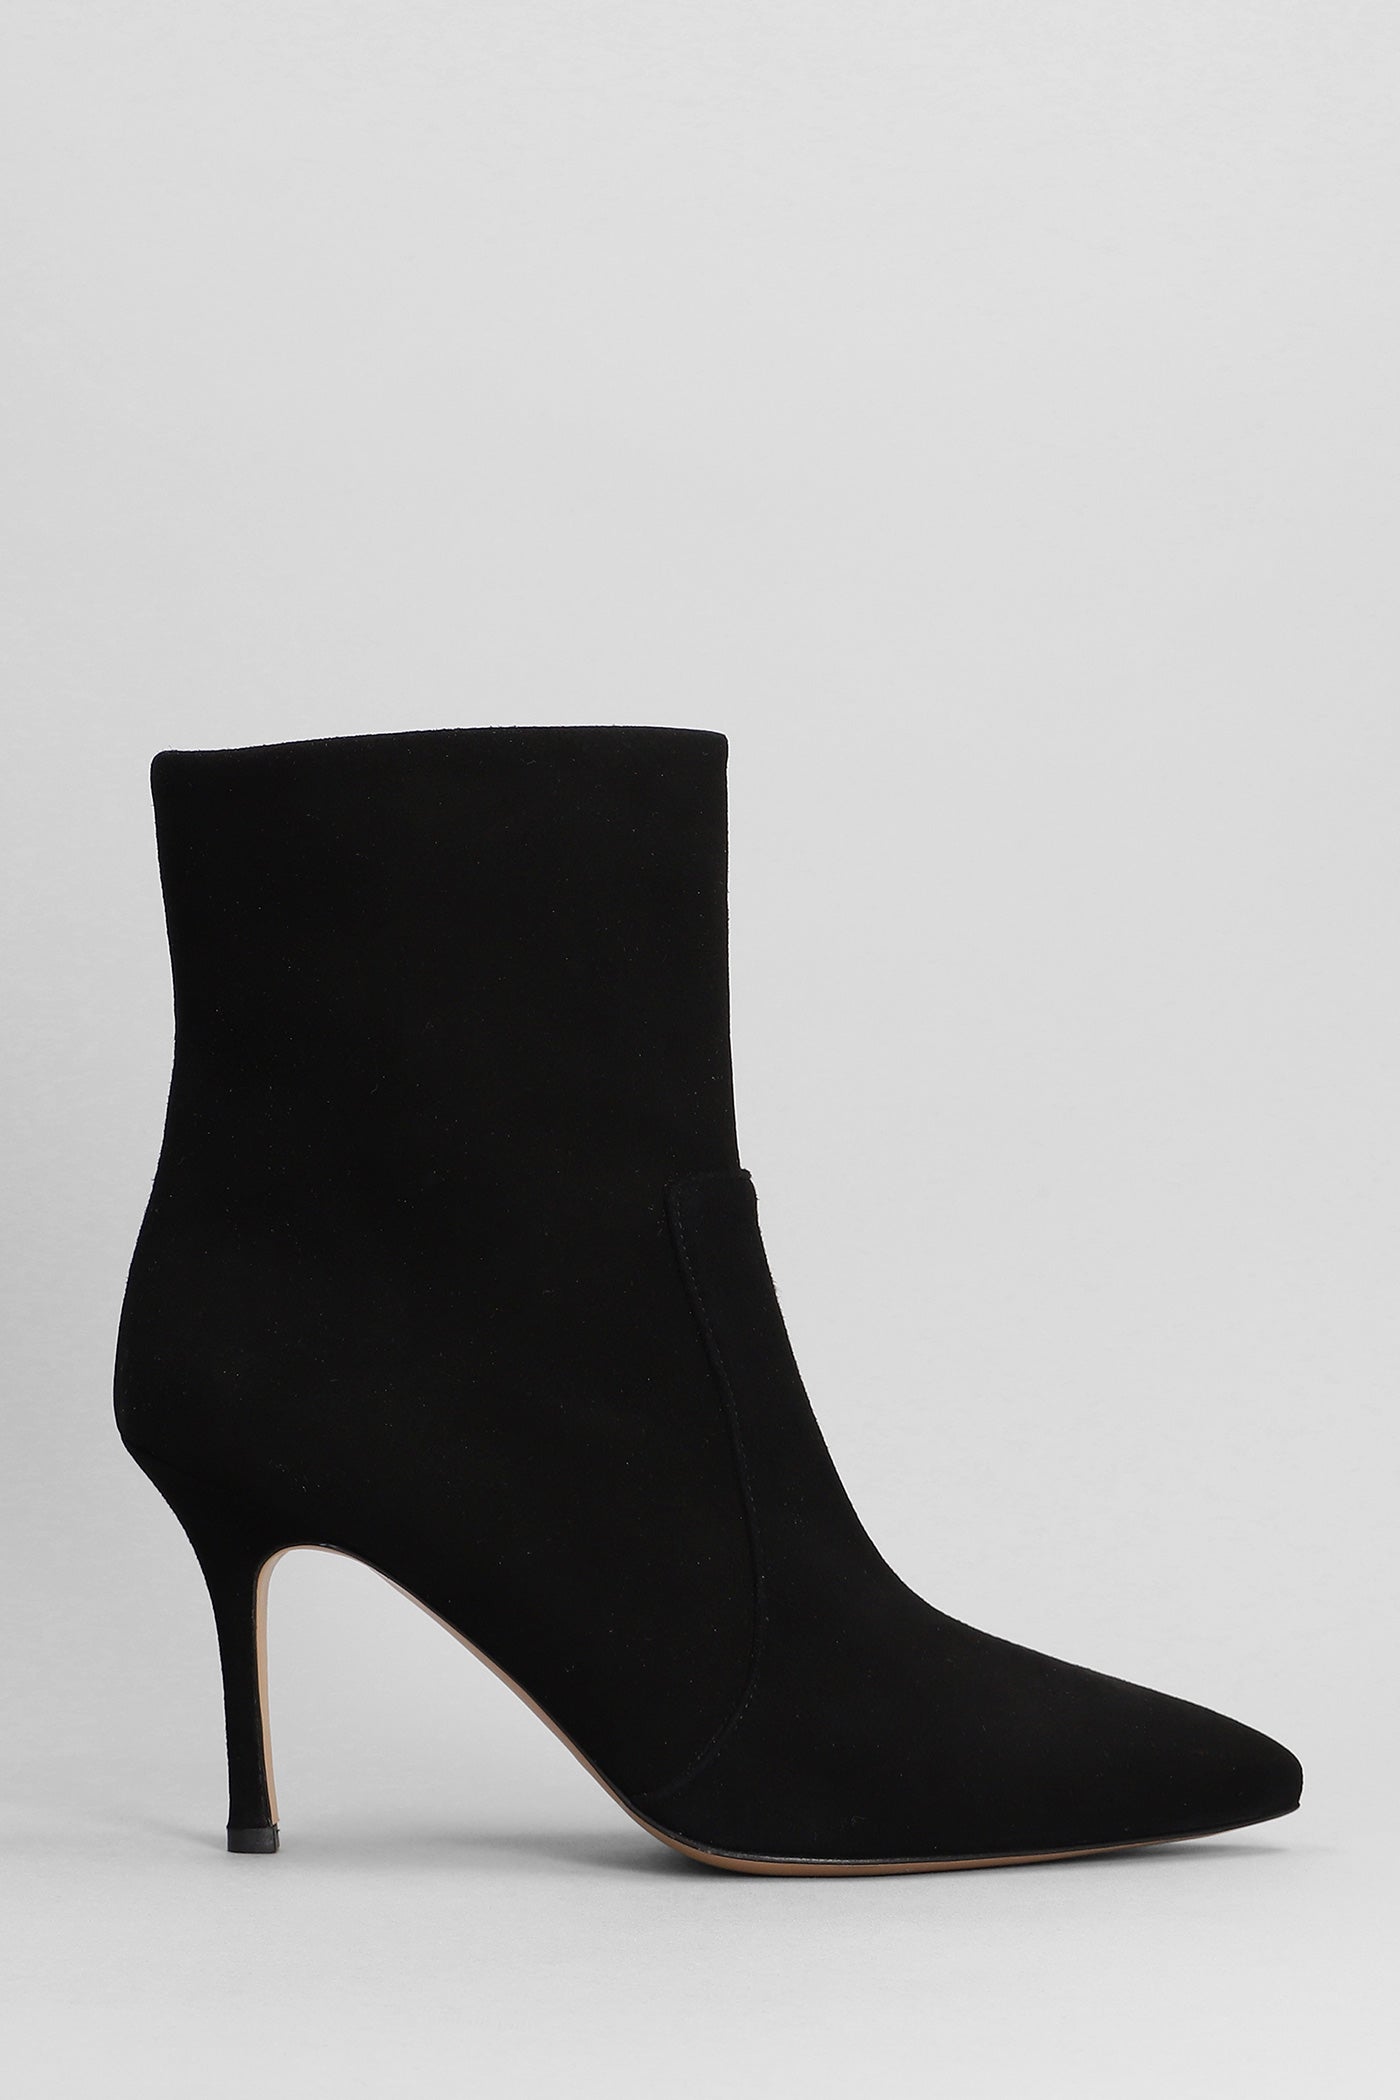 The Seller - High heels Ankle boots in black suede